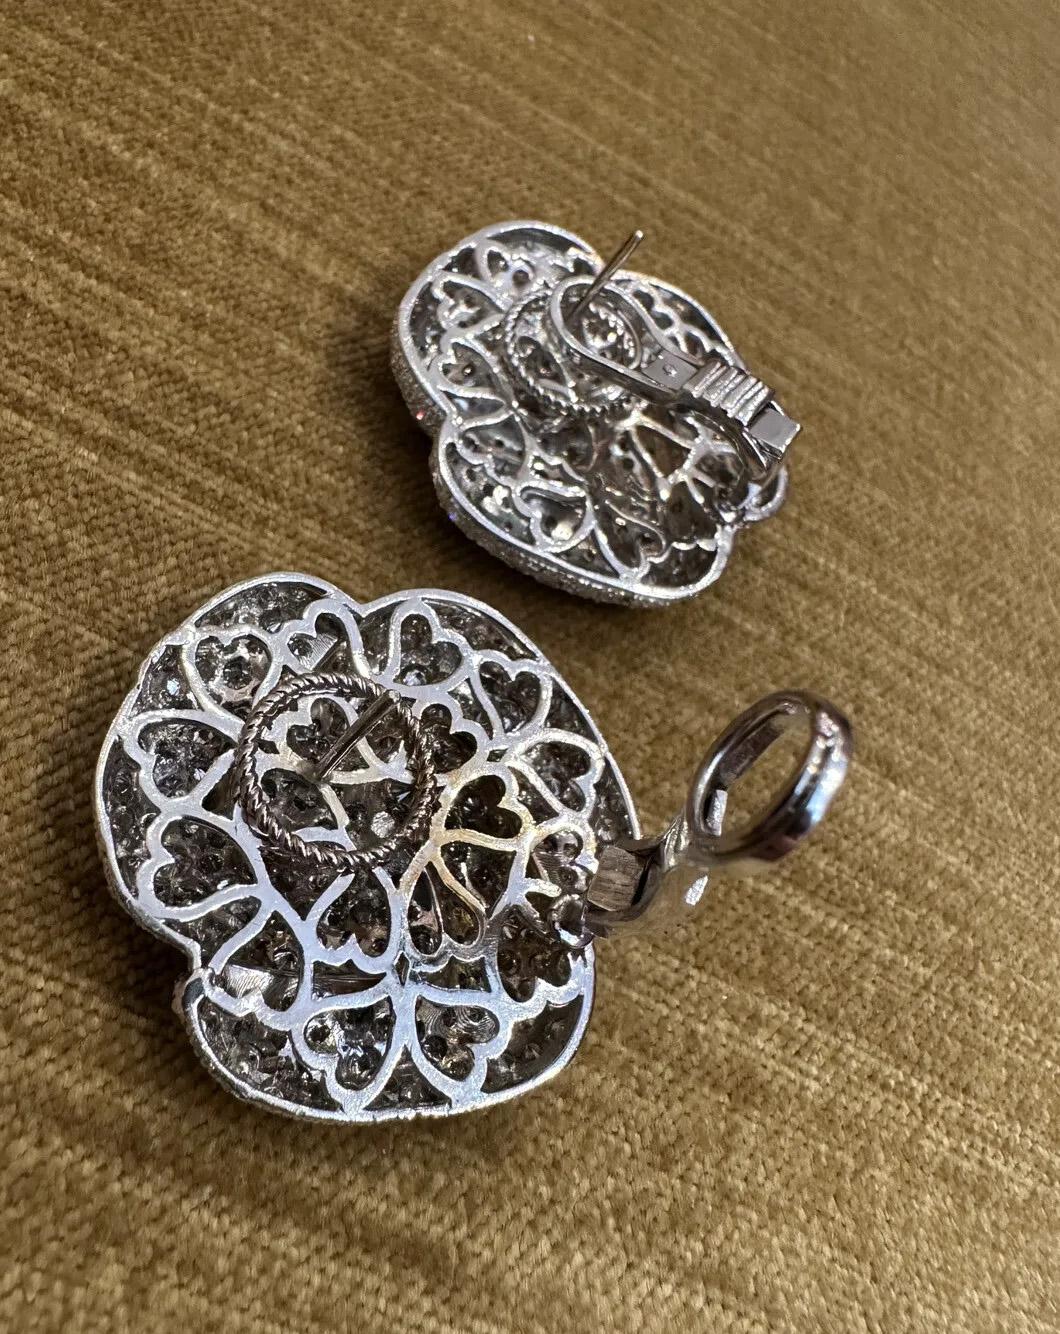 Round Cut Large Pave Diamond Knot Earrings 10.00 Carat Total Weight in 18k/14k White Gold For Sale